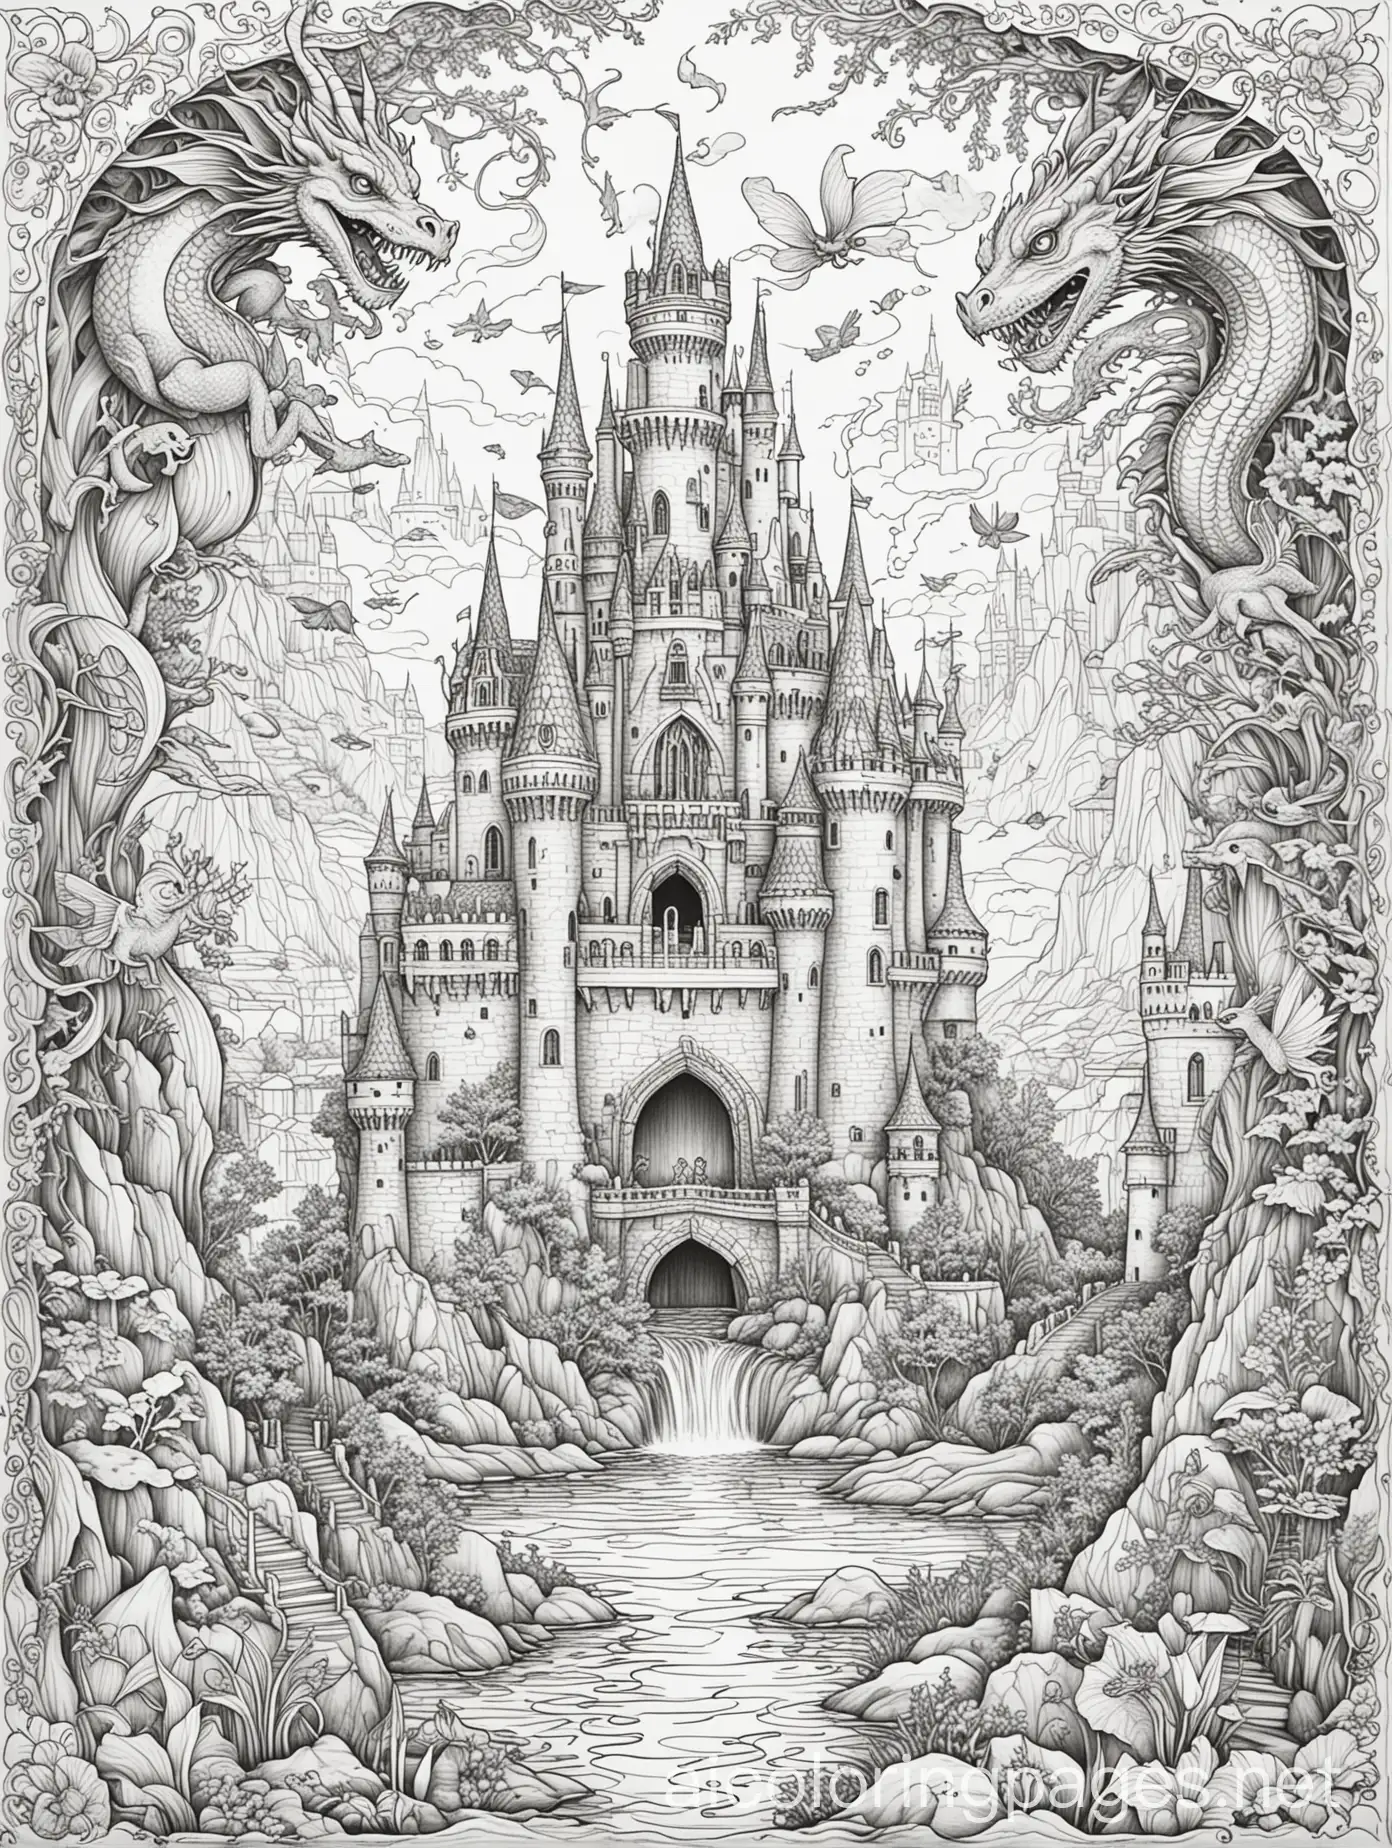 massive castle with a dragon in the sky and fairies around and mermaids in the water surrounding. , Coloring Page, black and white, line art, white background, Simplicity, Ample White Space. The background of the coloring page is plain white to make it easy for young children to color within the lines. The outlines of all the subjects are easy to distinguish, making it simple for kids to color without too much difficulty